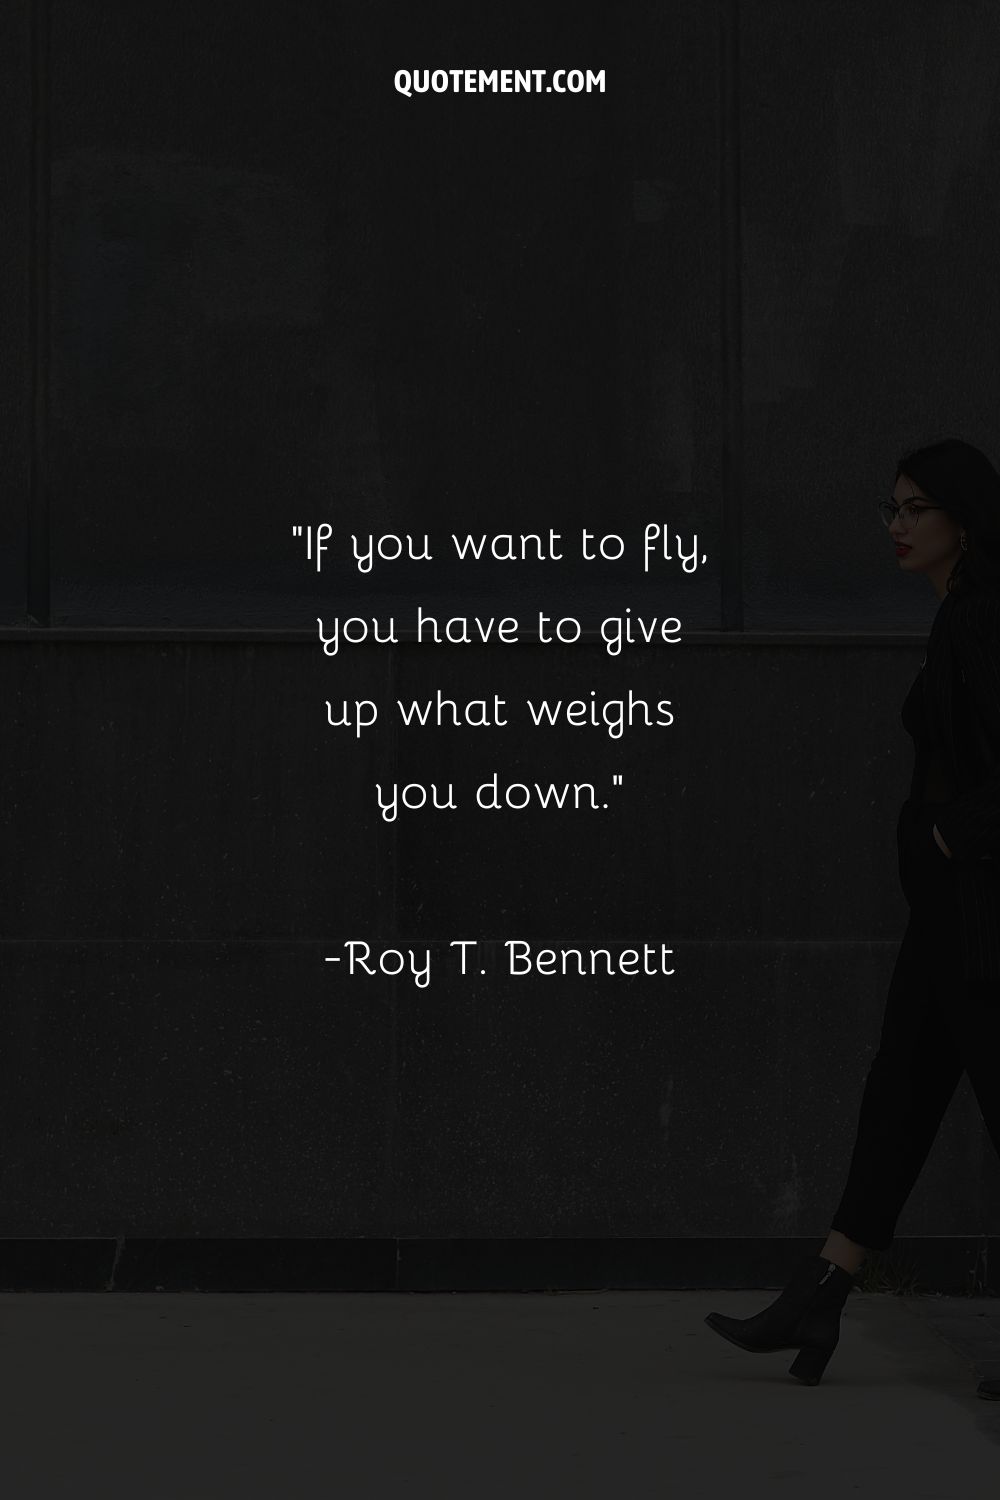 Image of a young woman dressed in black representing a quote on flying.